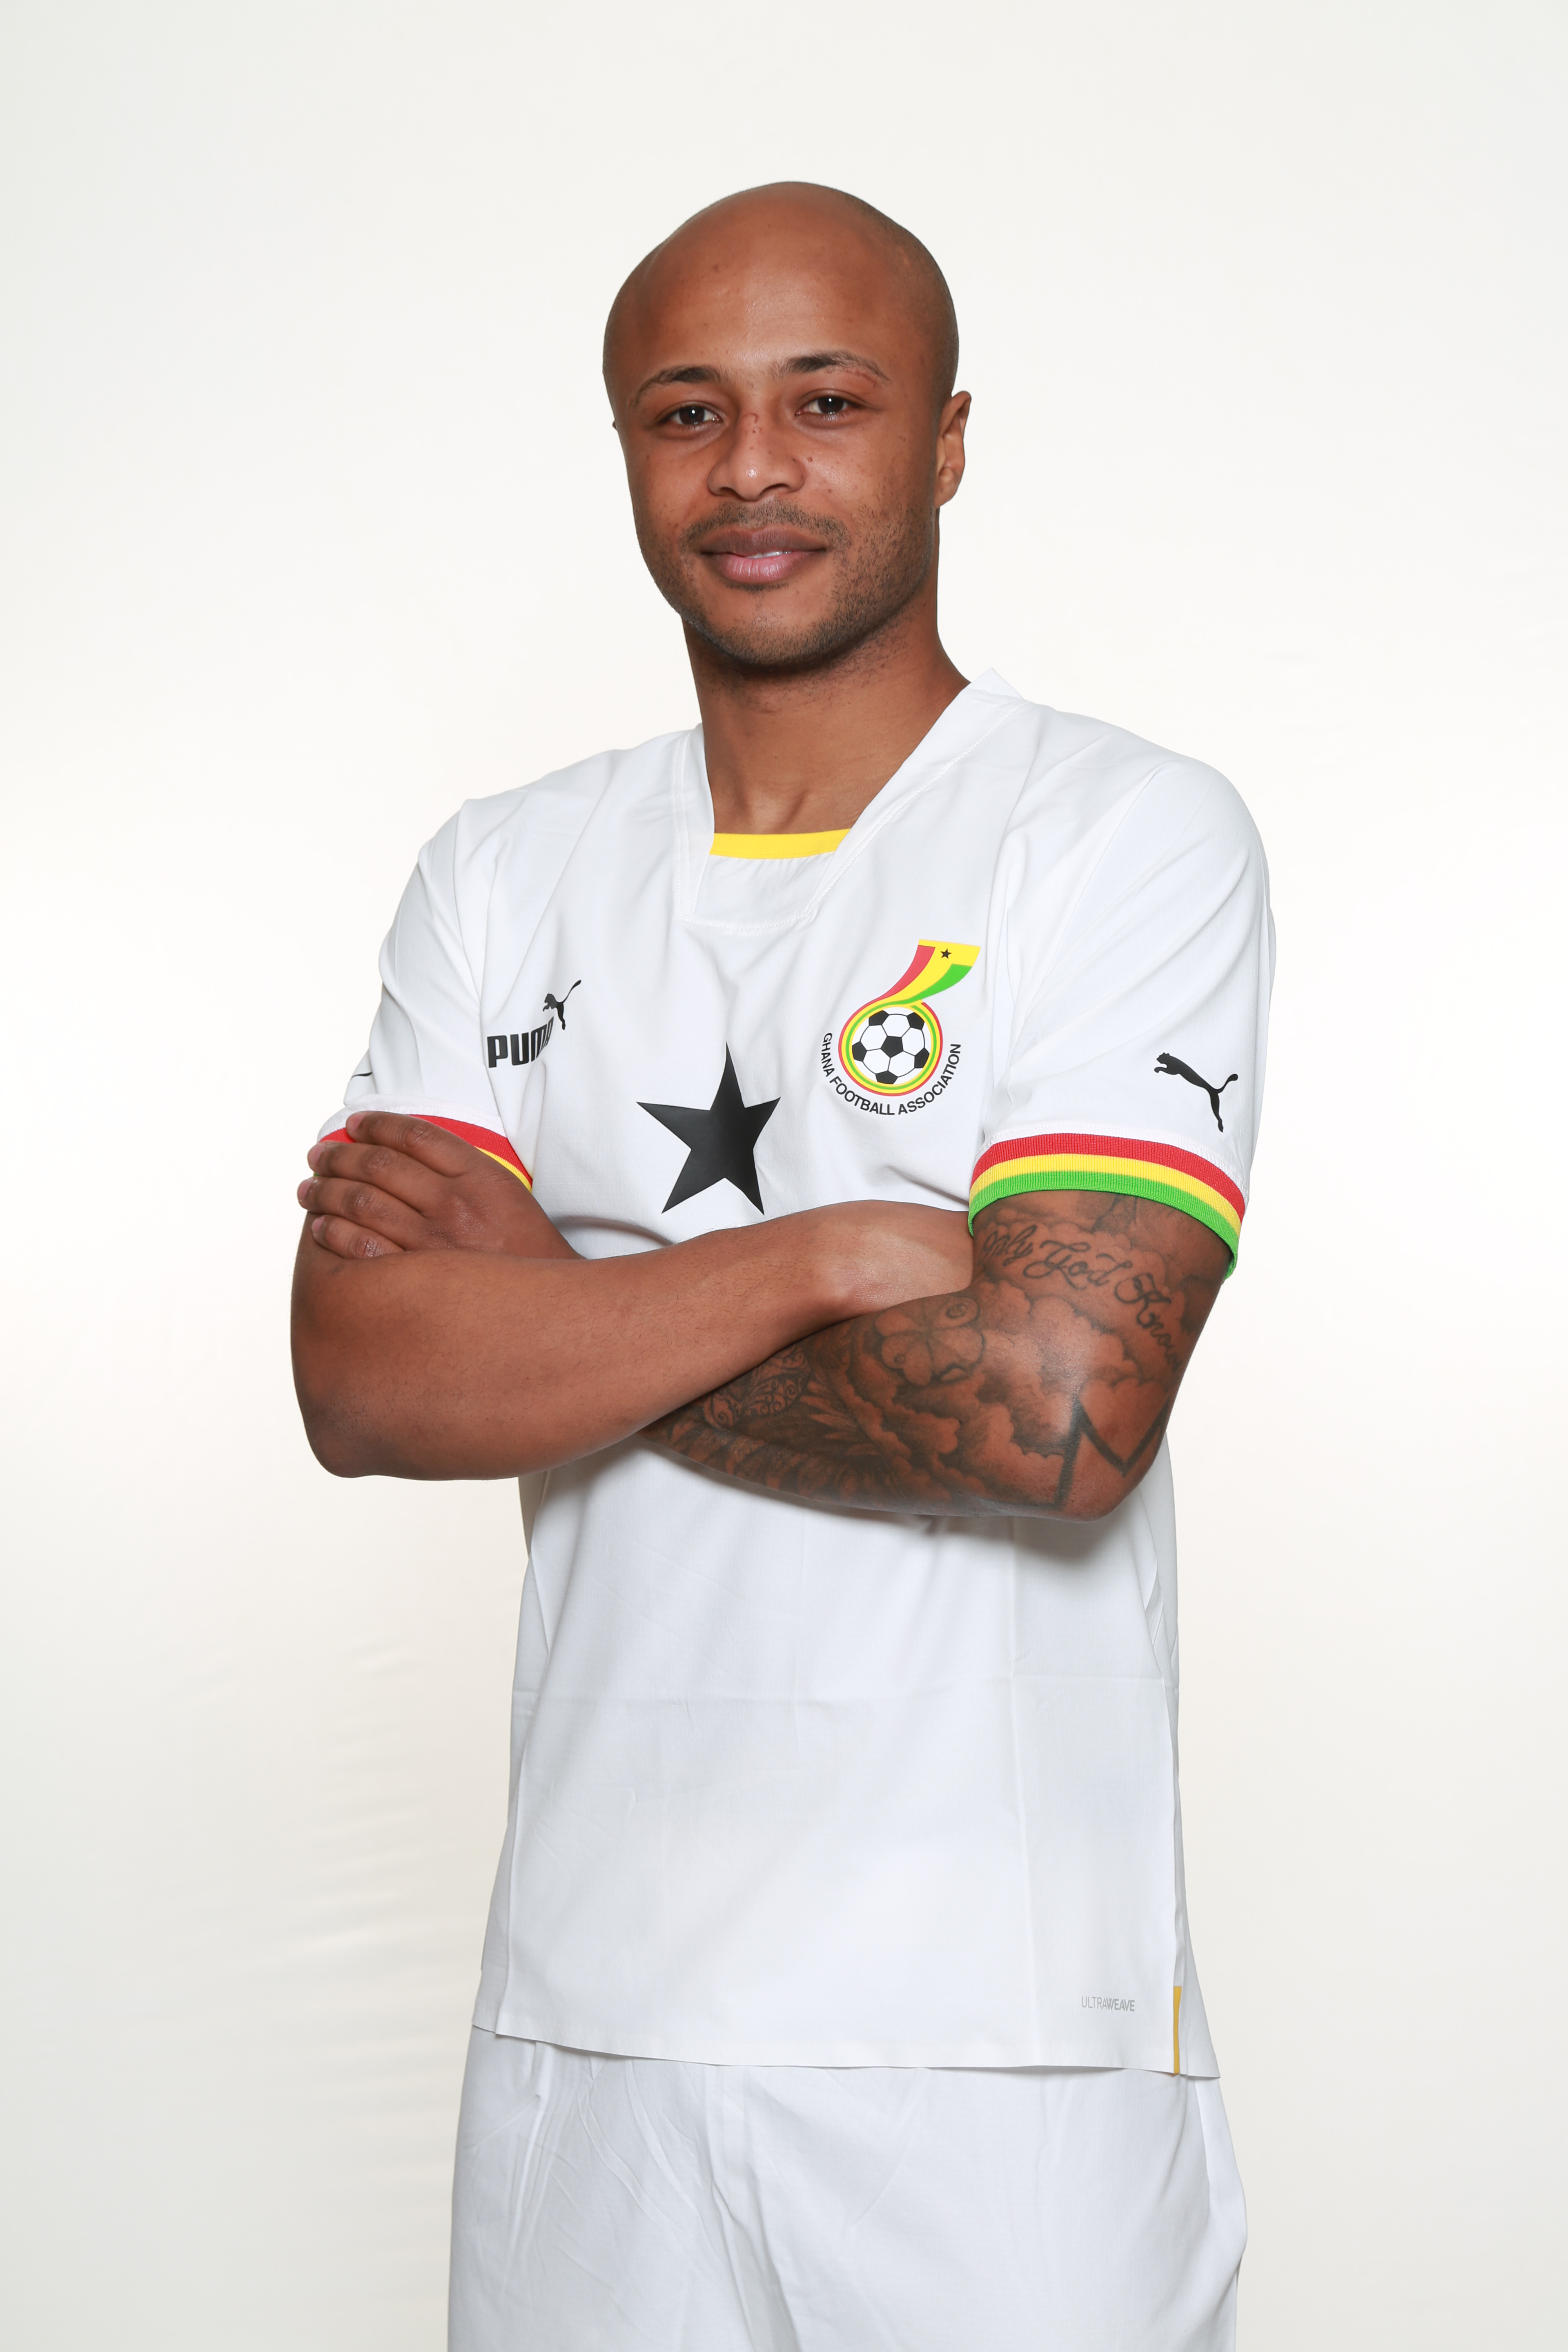 We will do our best to make Ghana proud – Captain Andre Ayew